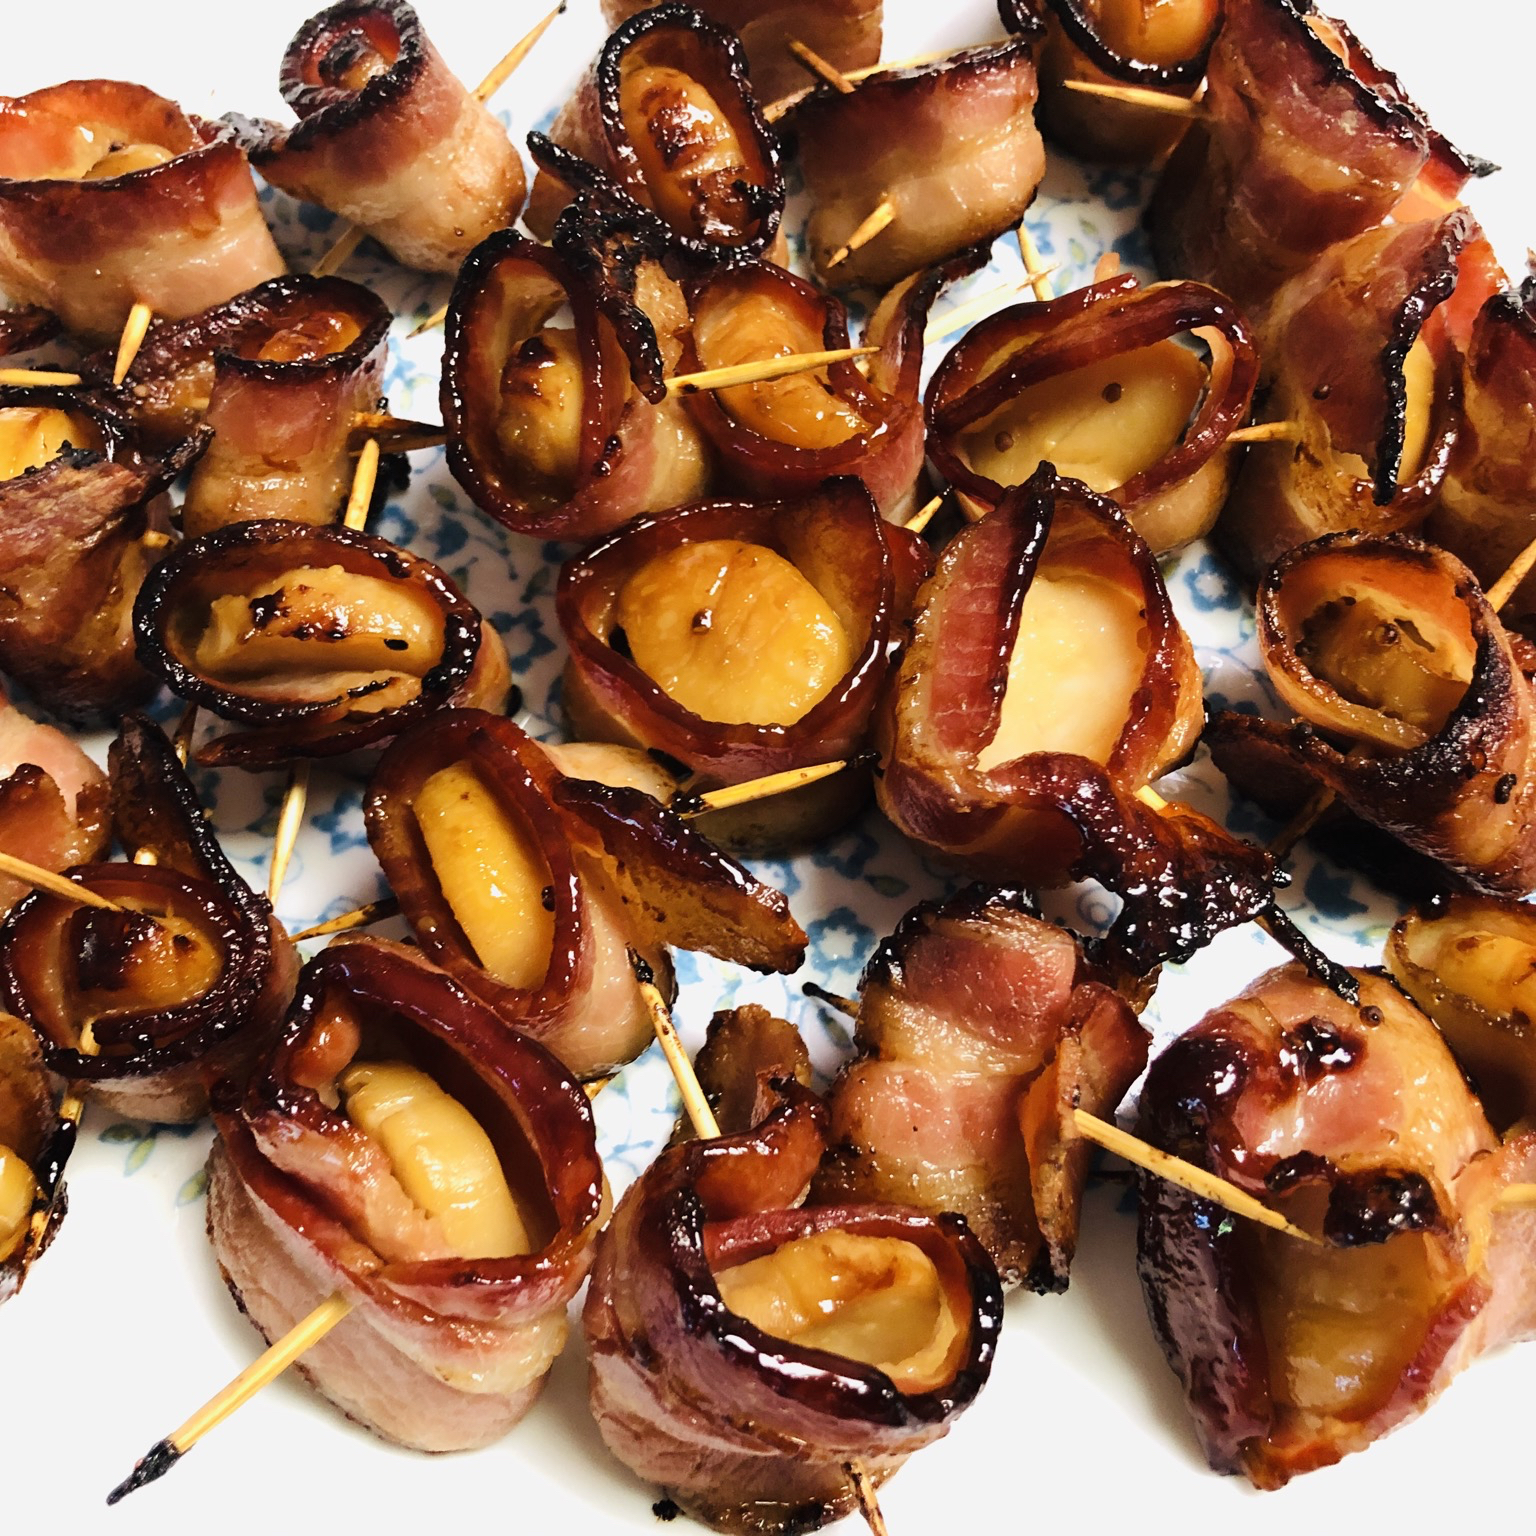 Marinated Scallops Wrapped in Bacon Cheng Wu